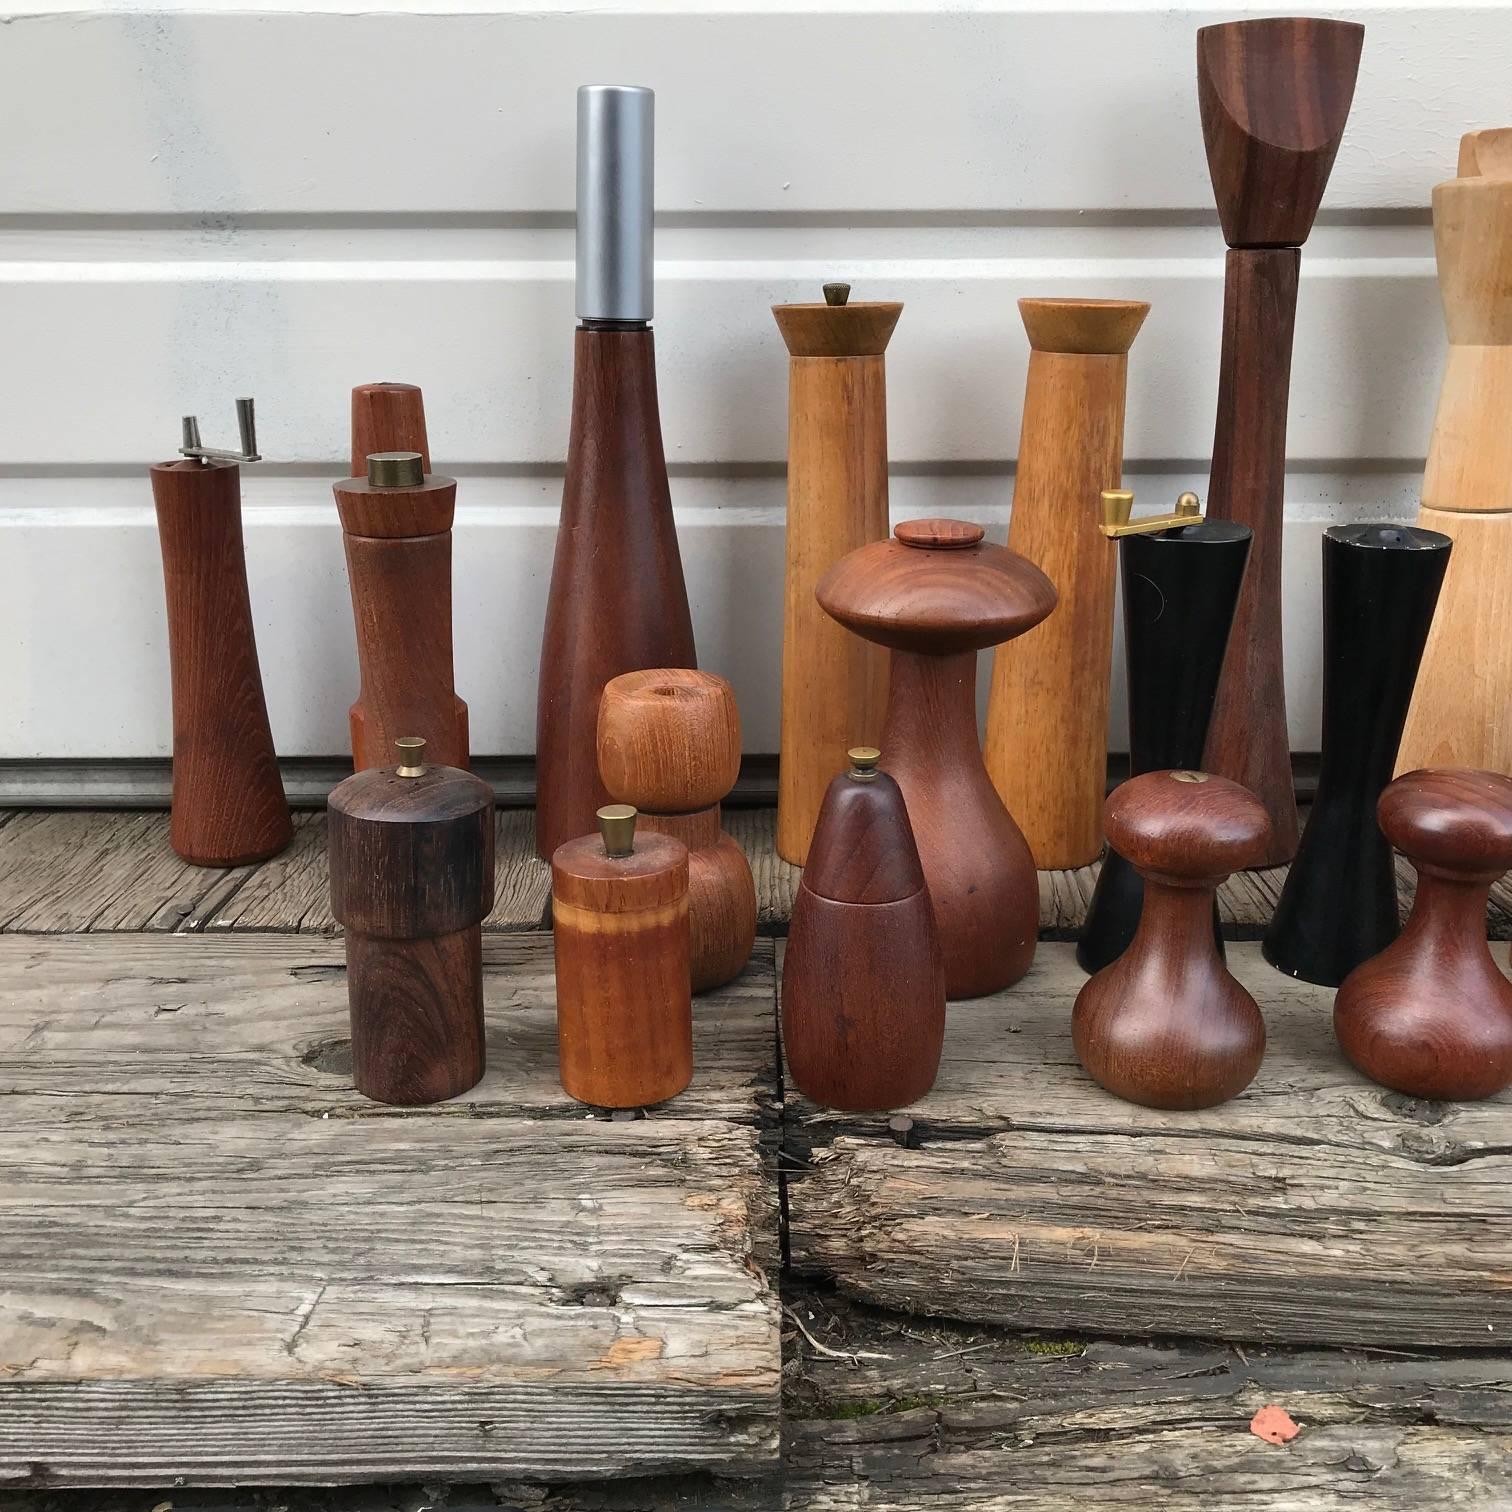 A wonderful set of peppermills at were largley aquired in Denmark, There are a pair Italians, a Japanese and a few Americans. There are a hand full of rare wood grainders. The Dansk mills are all Danish. There are no mills made in Thailand in the